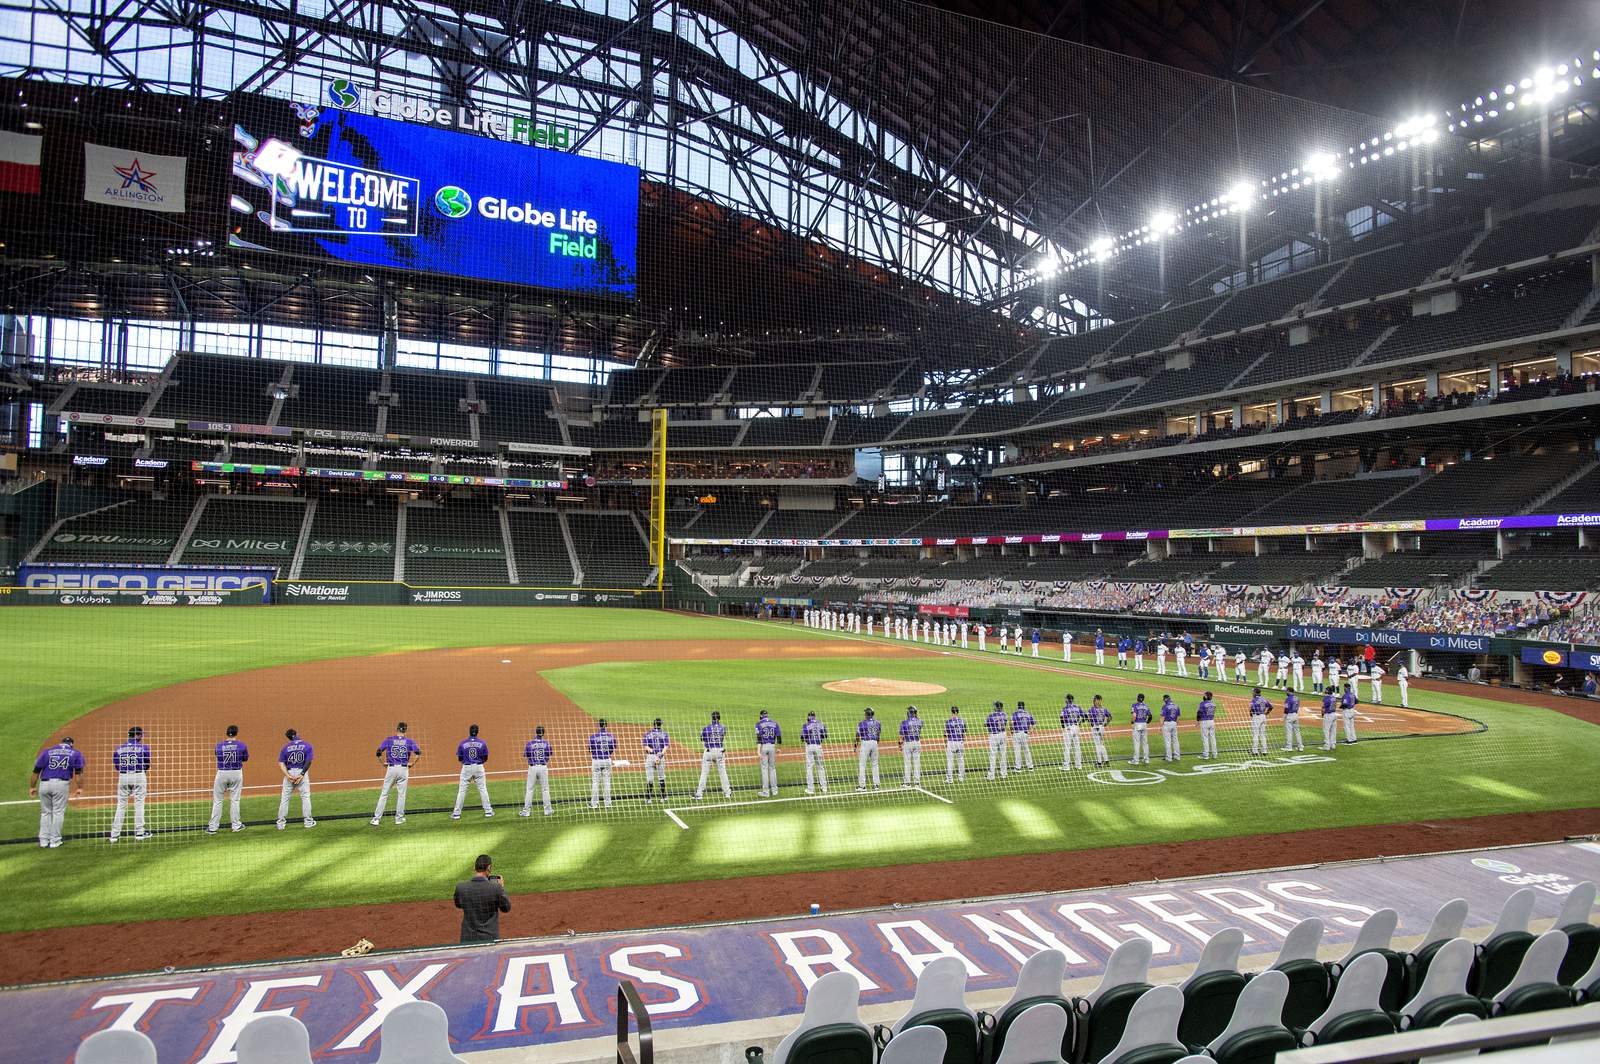 FILE - The Texas Rangers and Colorado Rockies line the foul lines of Globe Life Field before an opening day baseball game in Arlingtn, Texas, in this Friday, July 24, 2020, file photo. The Texas Rangers could have a full house for their home opener next month after debuting their new 40,518-seat stadium without fans in the stands for their games last season. If that happens, the Rangers could be the first team in MLB or any U.S.-based sport to have a full-capacity crowd since the coronavirus pandemic started rapidly shutting down sports a year ago this week. (AP Photo/Jeffrey McWhorter, File)